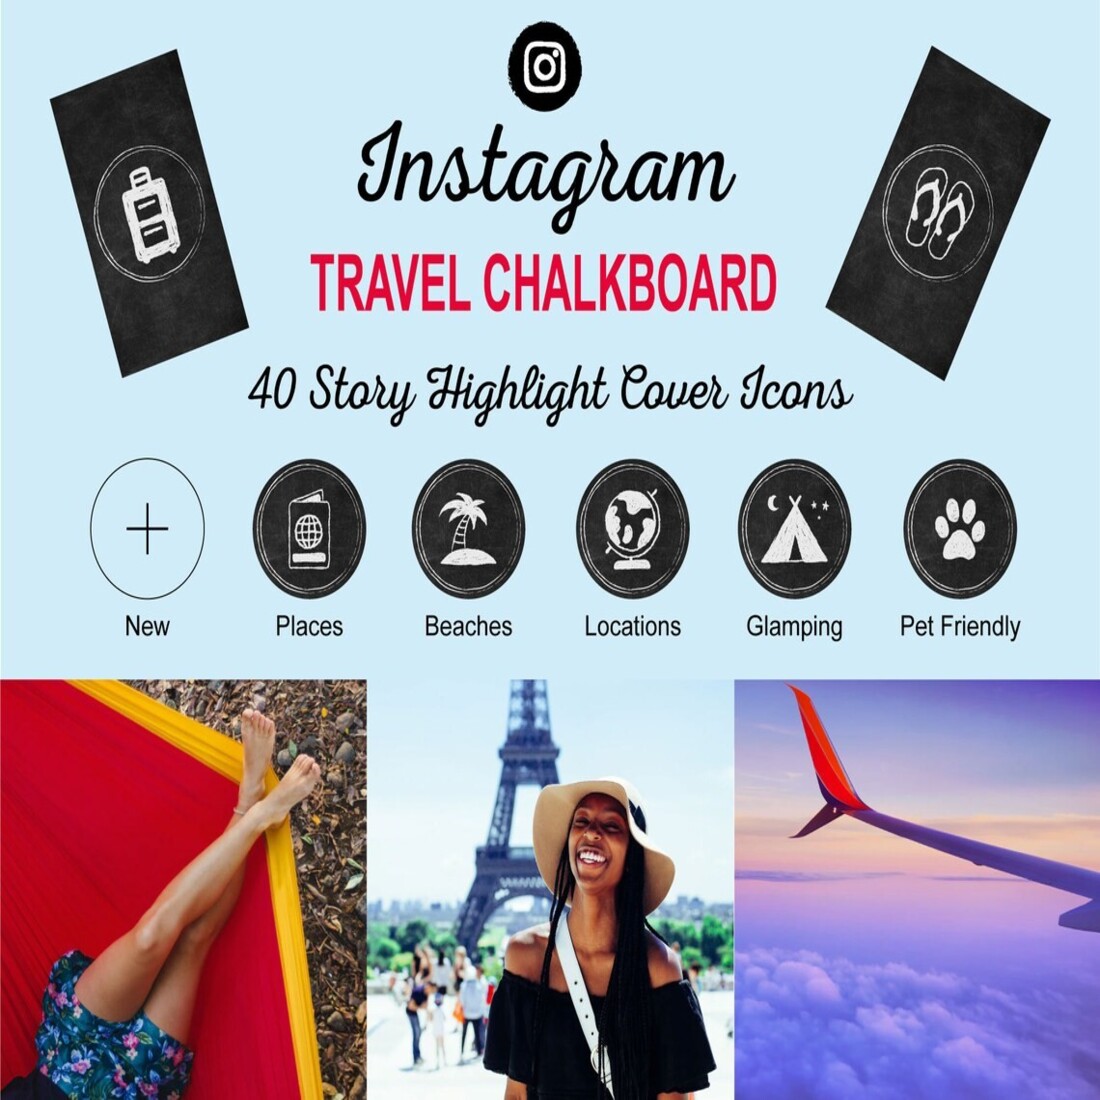 Instagram Travel Chalkboard (40 Story Highlight Covers Icons) cover image.